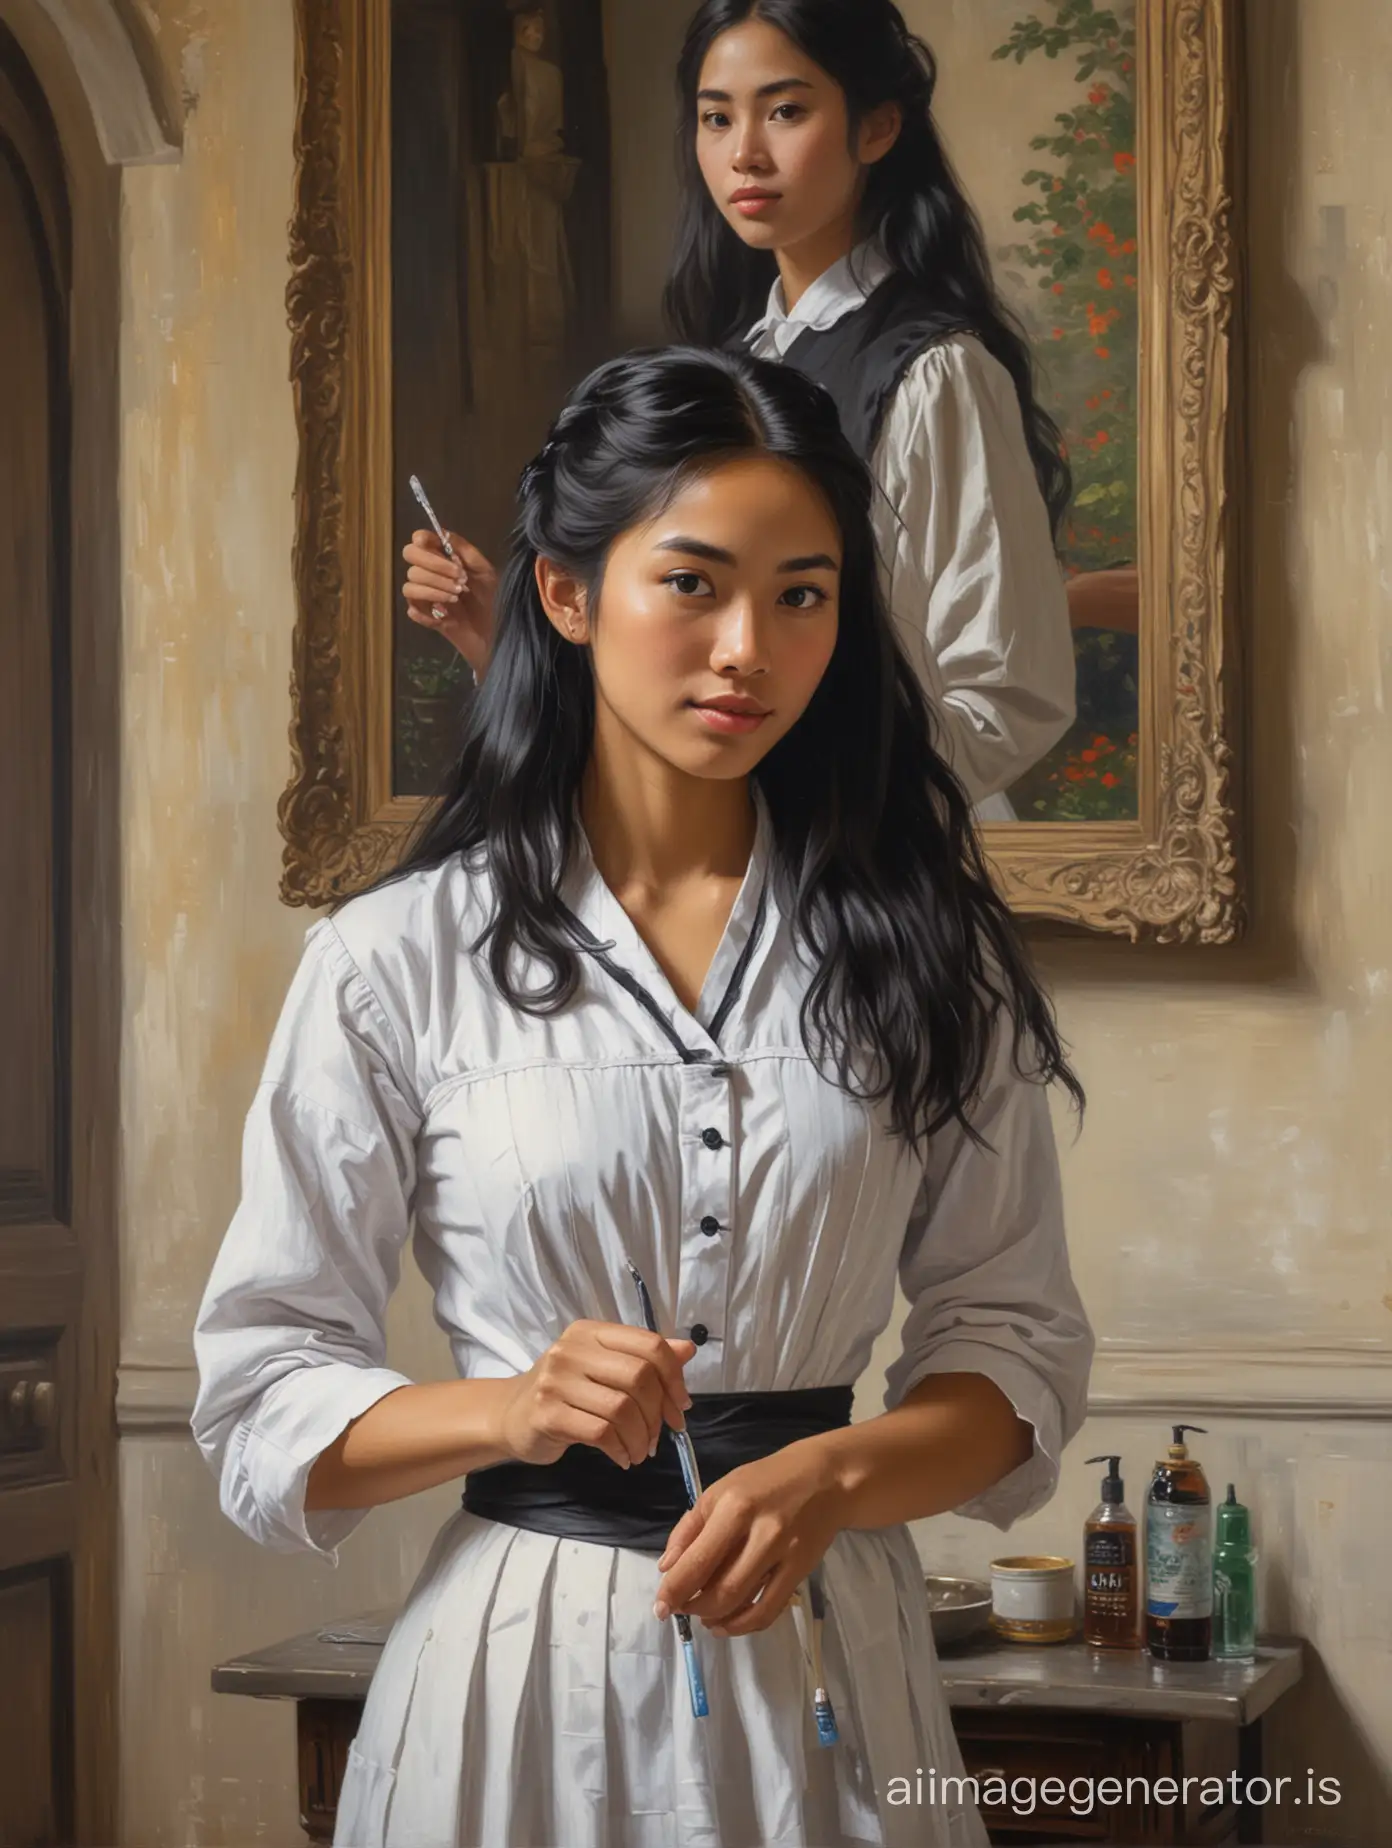 Vietnamese-Maid-with-Toothbrush-in-Castle-Bathroom-Oil-Painting